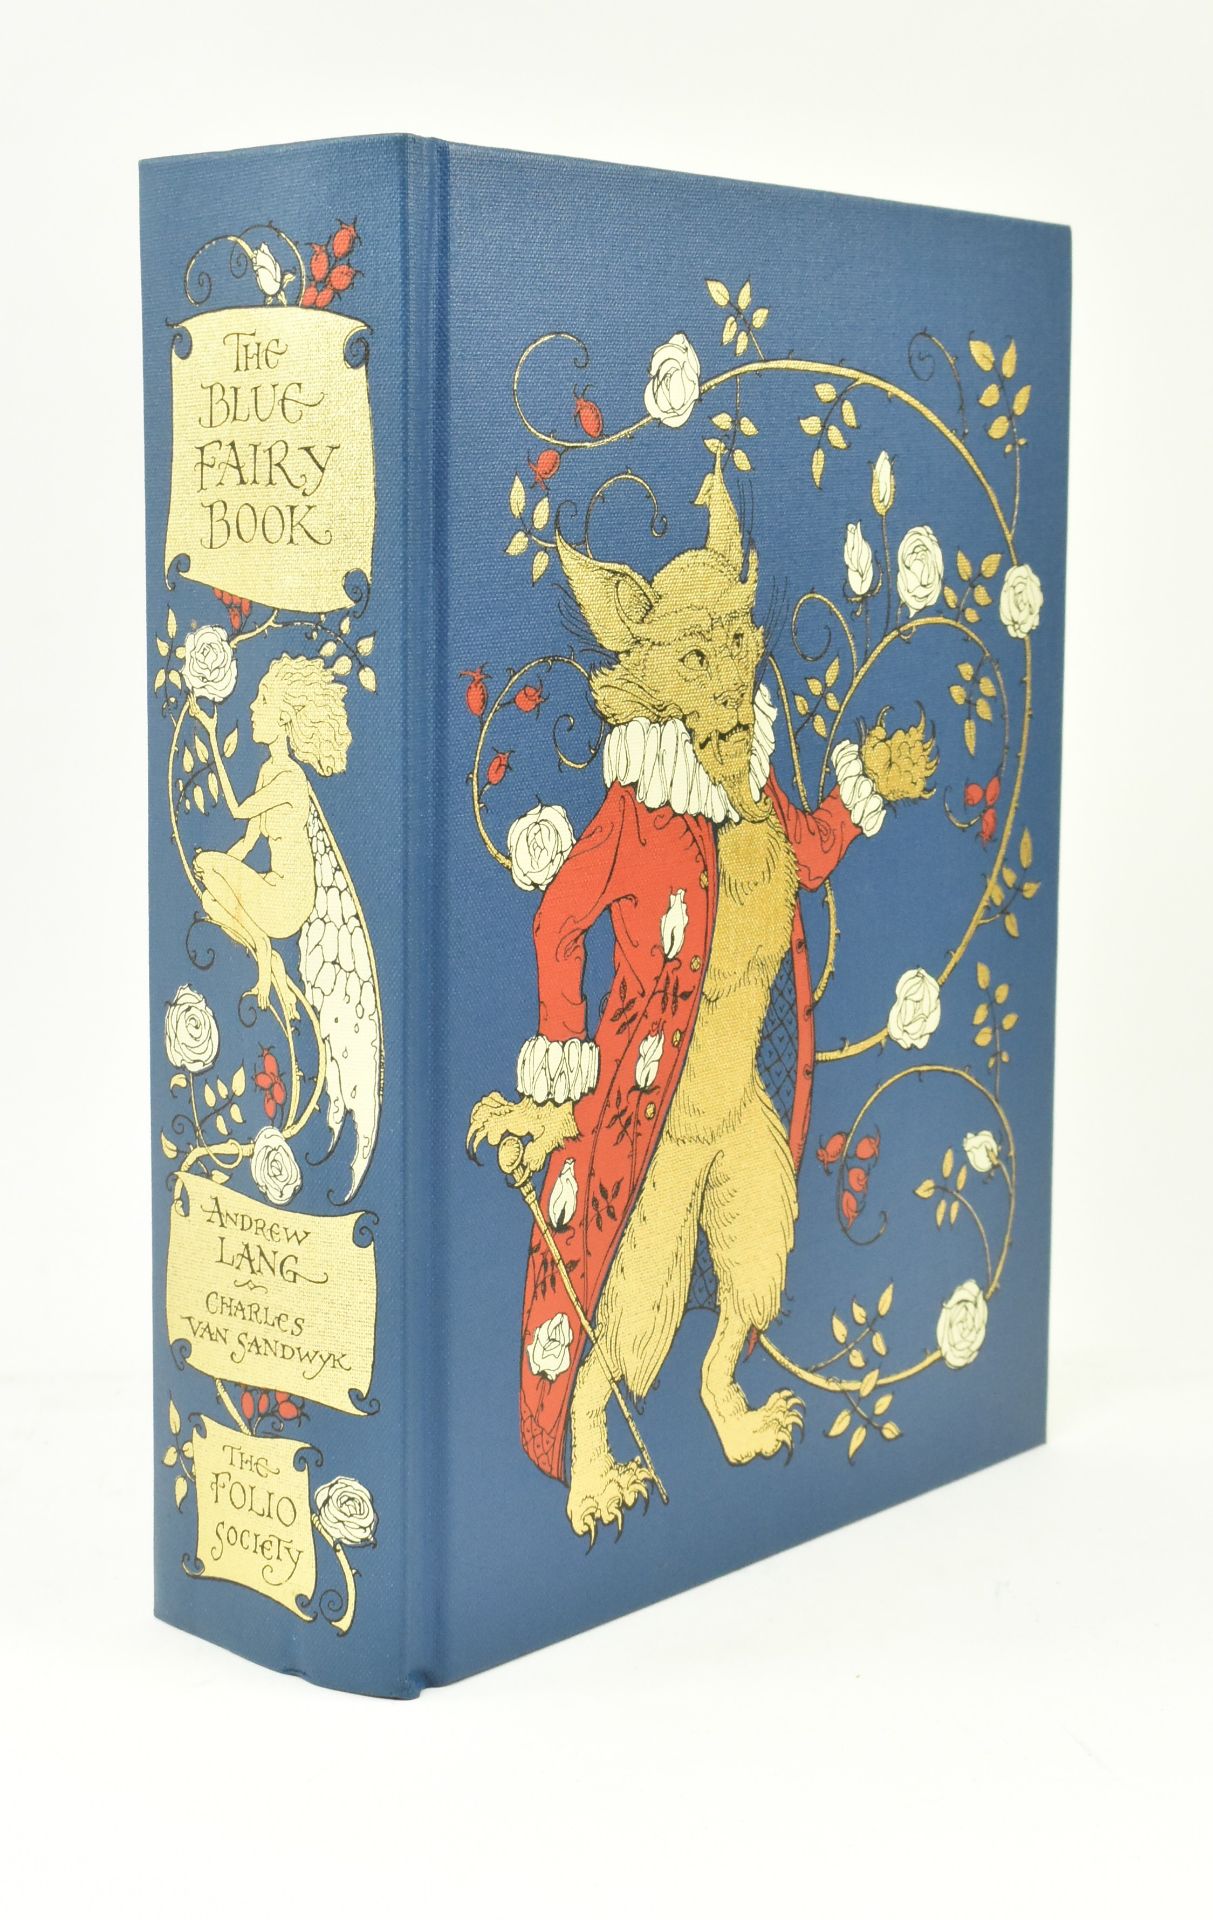 FOLIO SOCIETY. ANDREW LANG'S BLUE FAIRY BOOK FIRST PRINTING